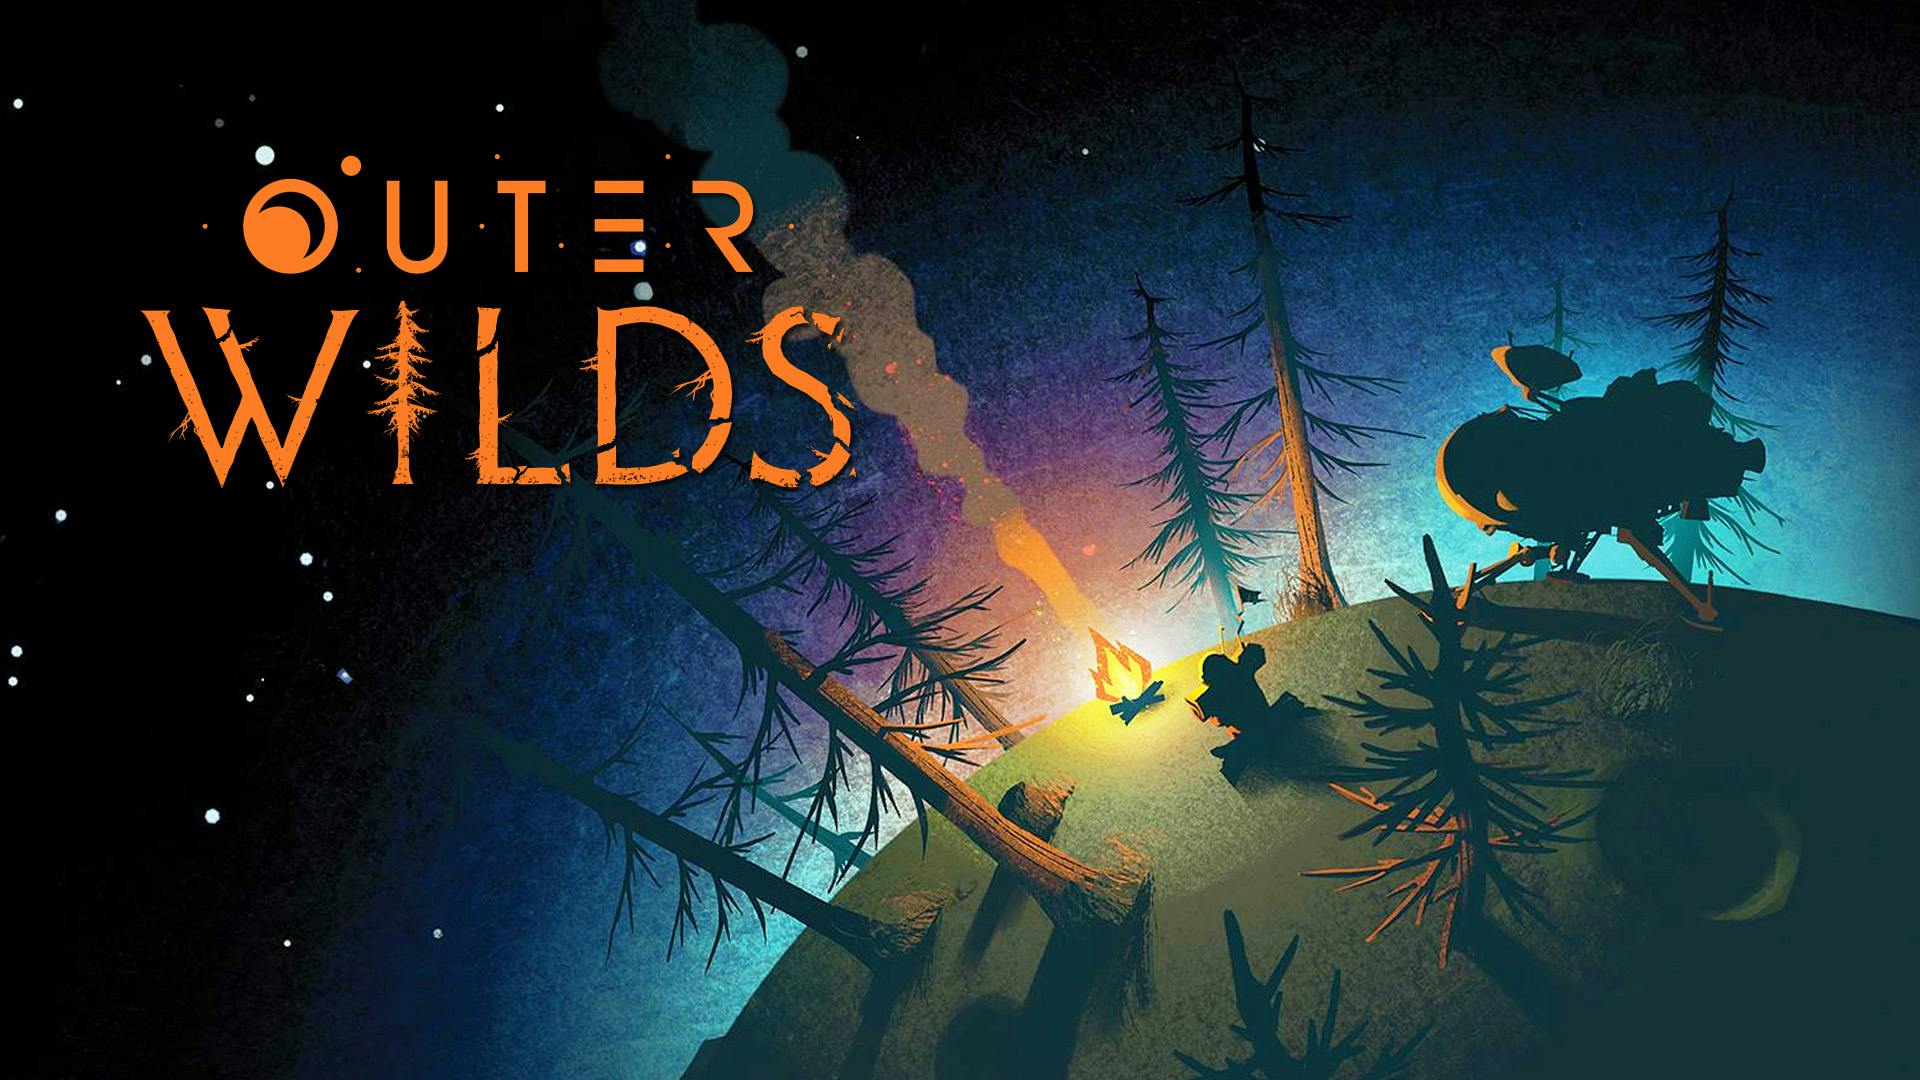 3f3f0488-39e1-4ea1-961f-725a39480706_Outer+Wilds_banner.jpg